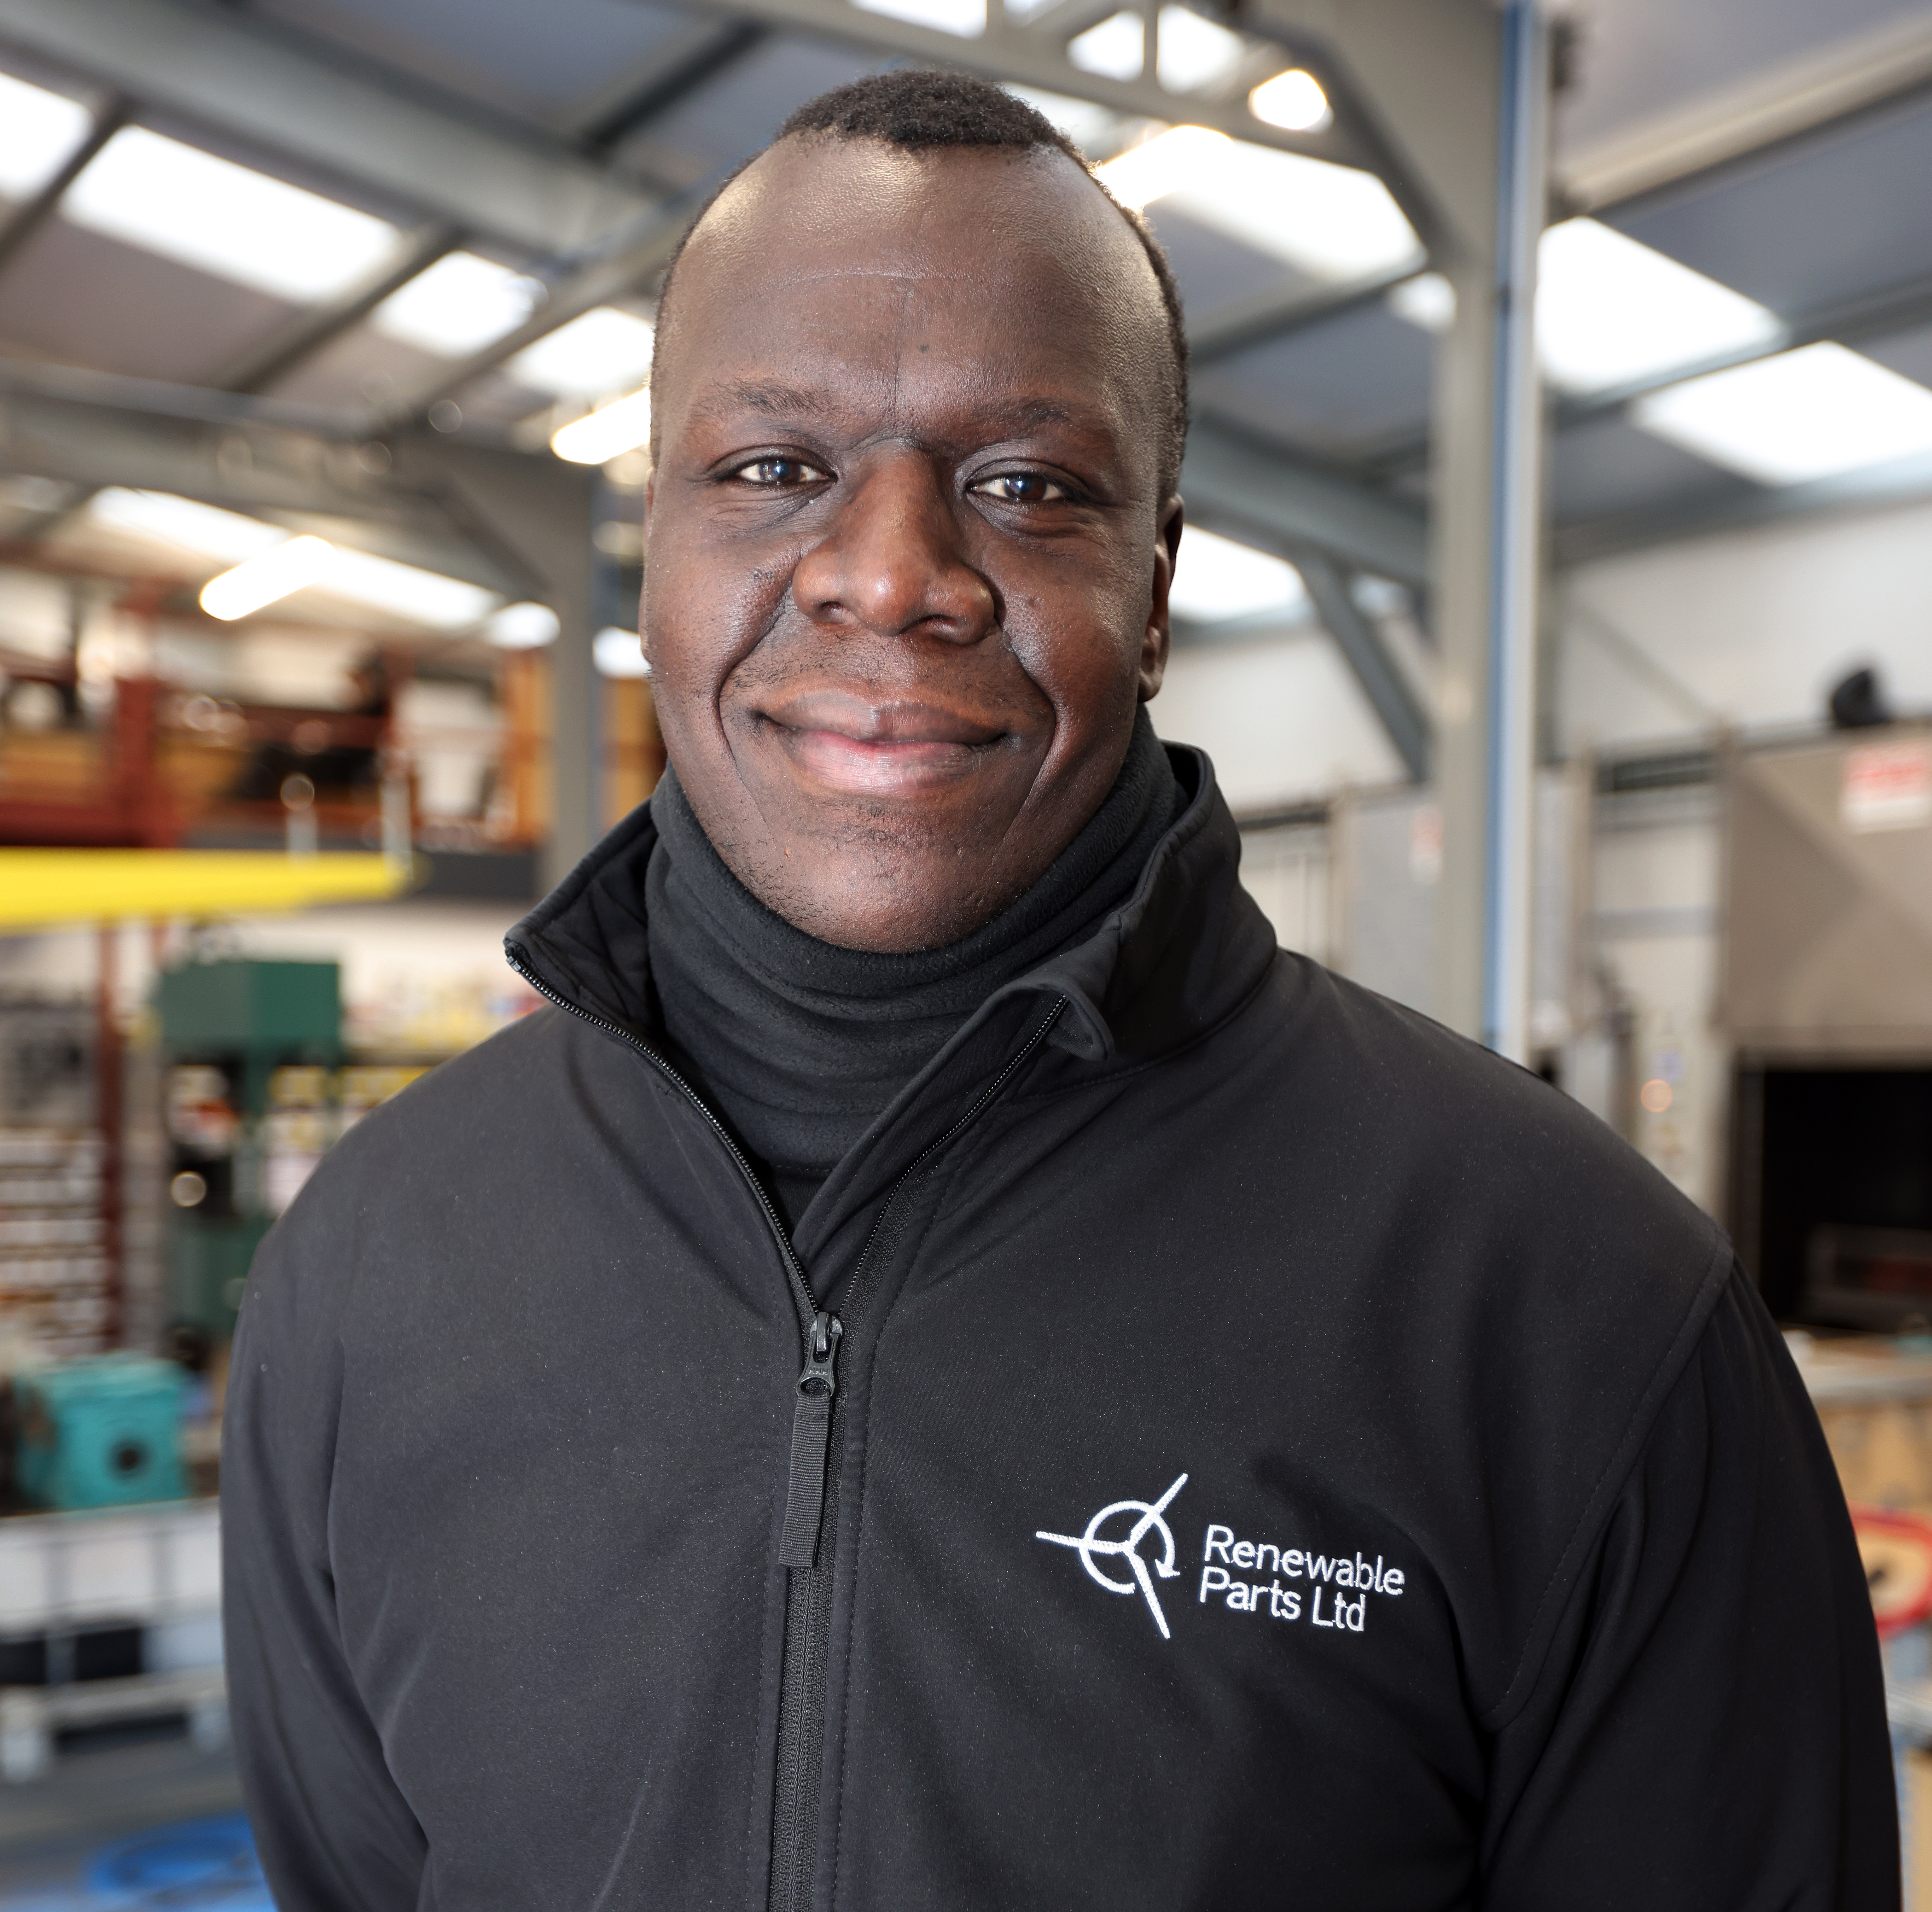 Picture of man smiling in a factory wearing Renewable Parts Ltd jacket